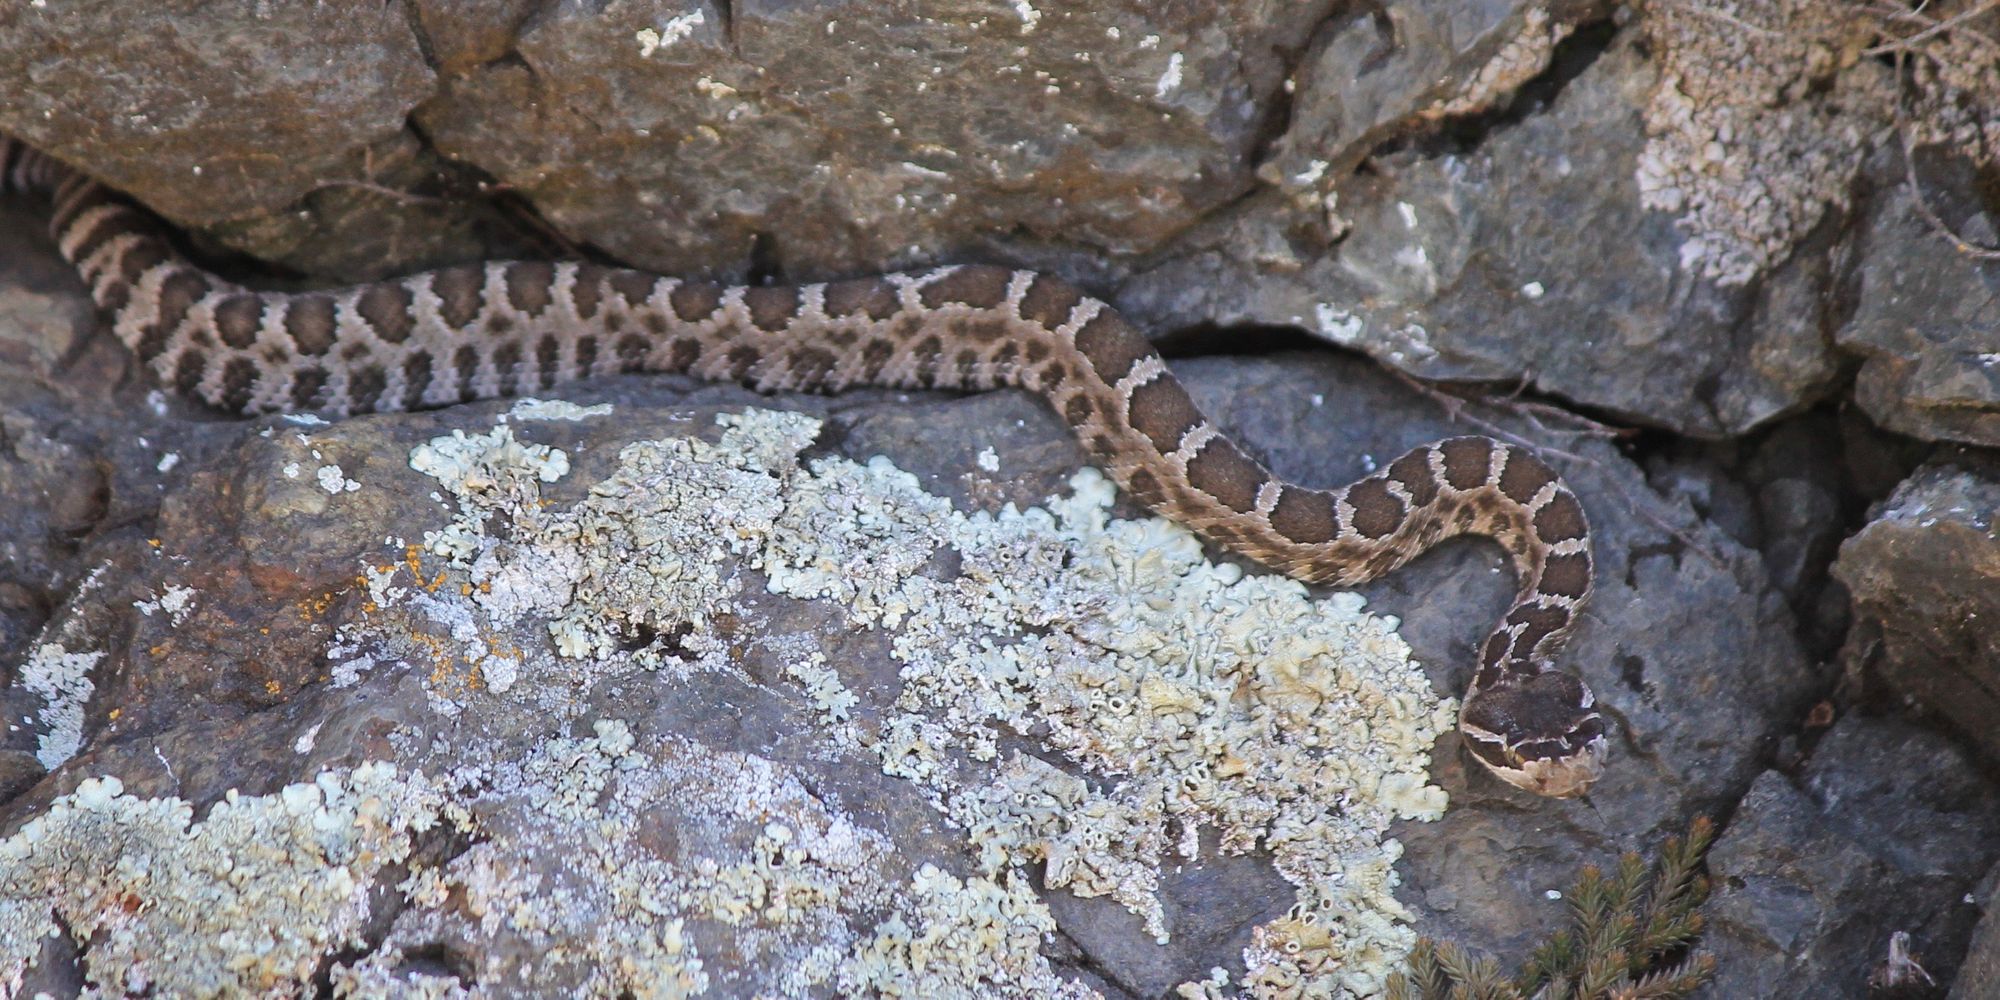 Habitat selection of northern Pacific rattlesnakes